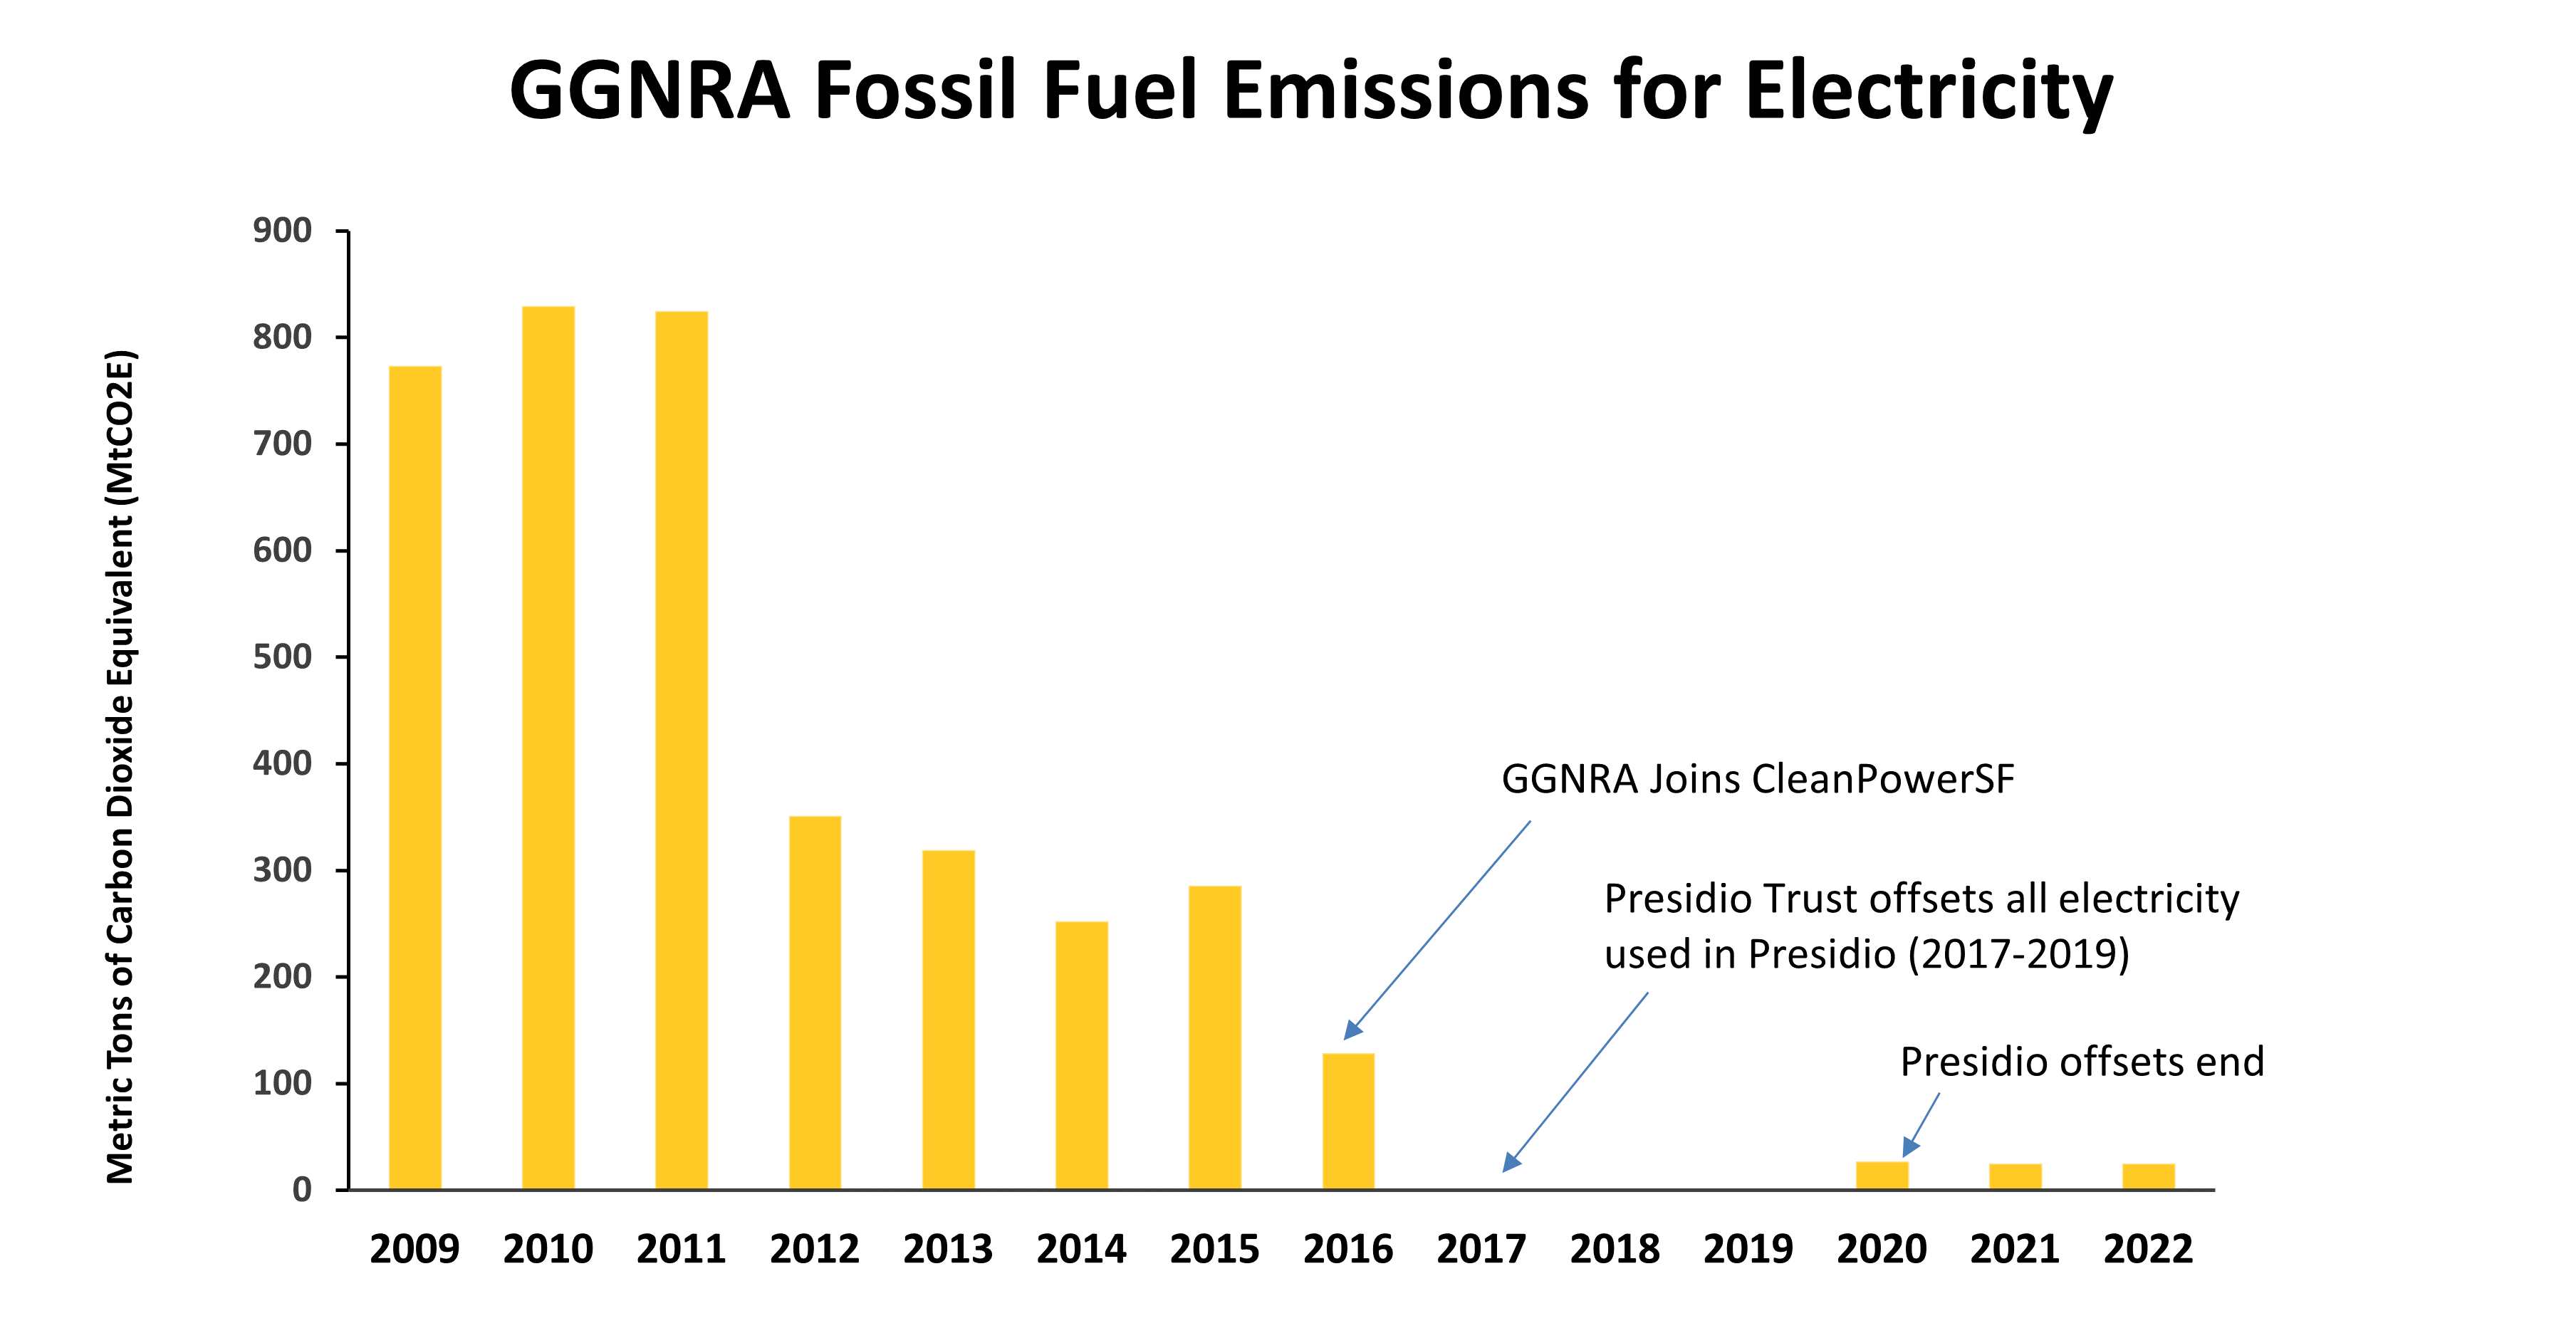 Graph of greenhouse gas emissions from electricity between 2009 and 2022. Emissions trend downward, as GGNRA joins MCE Clean Energy and Alcatraz solar PV goes online in 2012 and further as GGNRA joins CleanPowerSF in 2016.